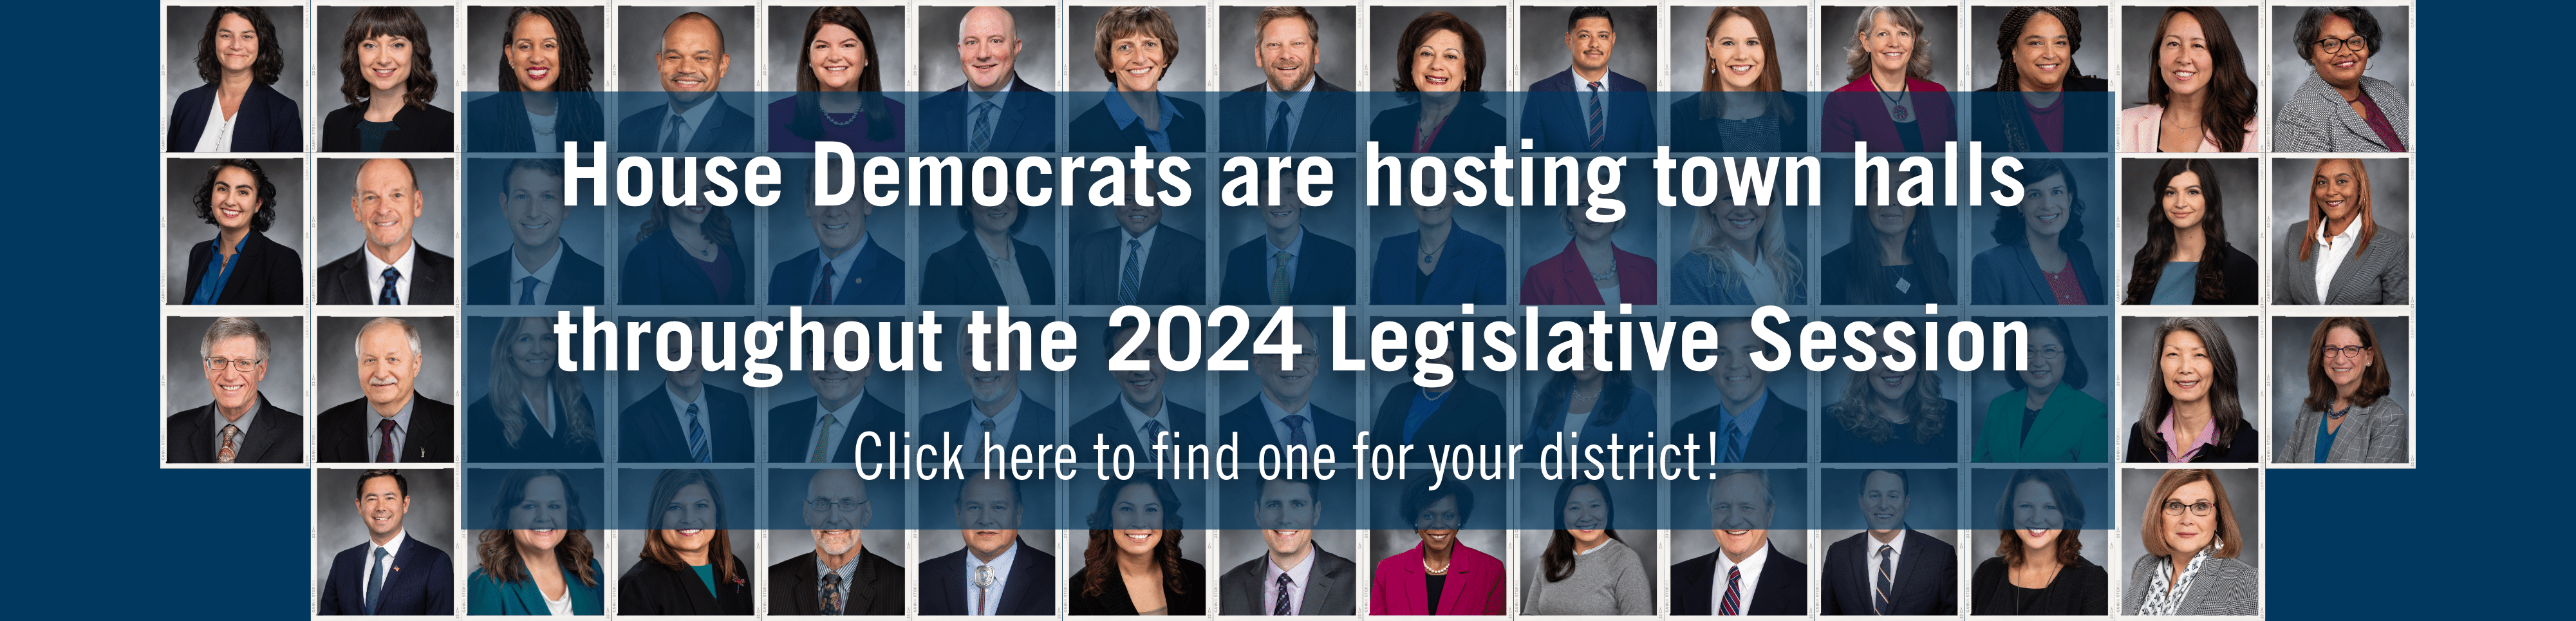 A banner with small portraits of every single member of the House Democratic Caucus in the background, and in the foreground text that reads House Democrats are hosting town halls throughout the 2024 Legislative Session Click here to find one for your district!